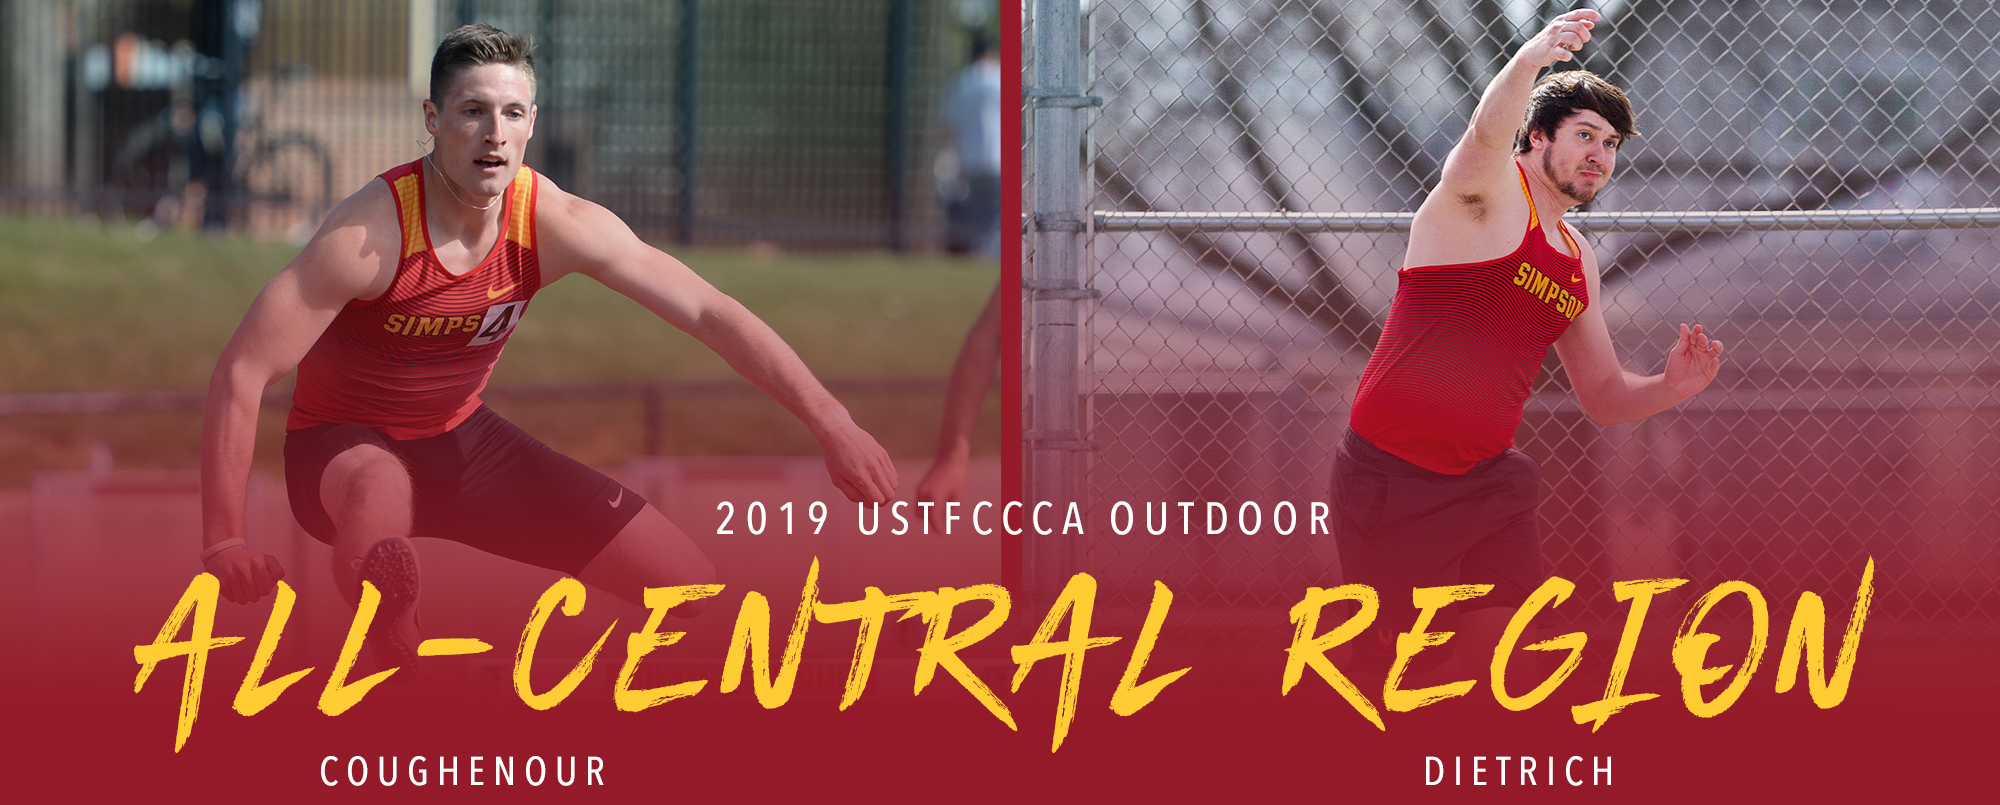 Jordan Coughenour and Josh Dietrich were both placed on the USTFCCCA All-Central Region team.